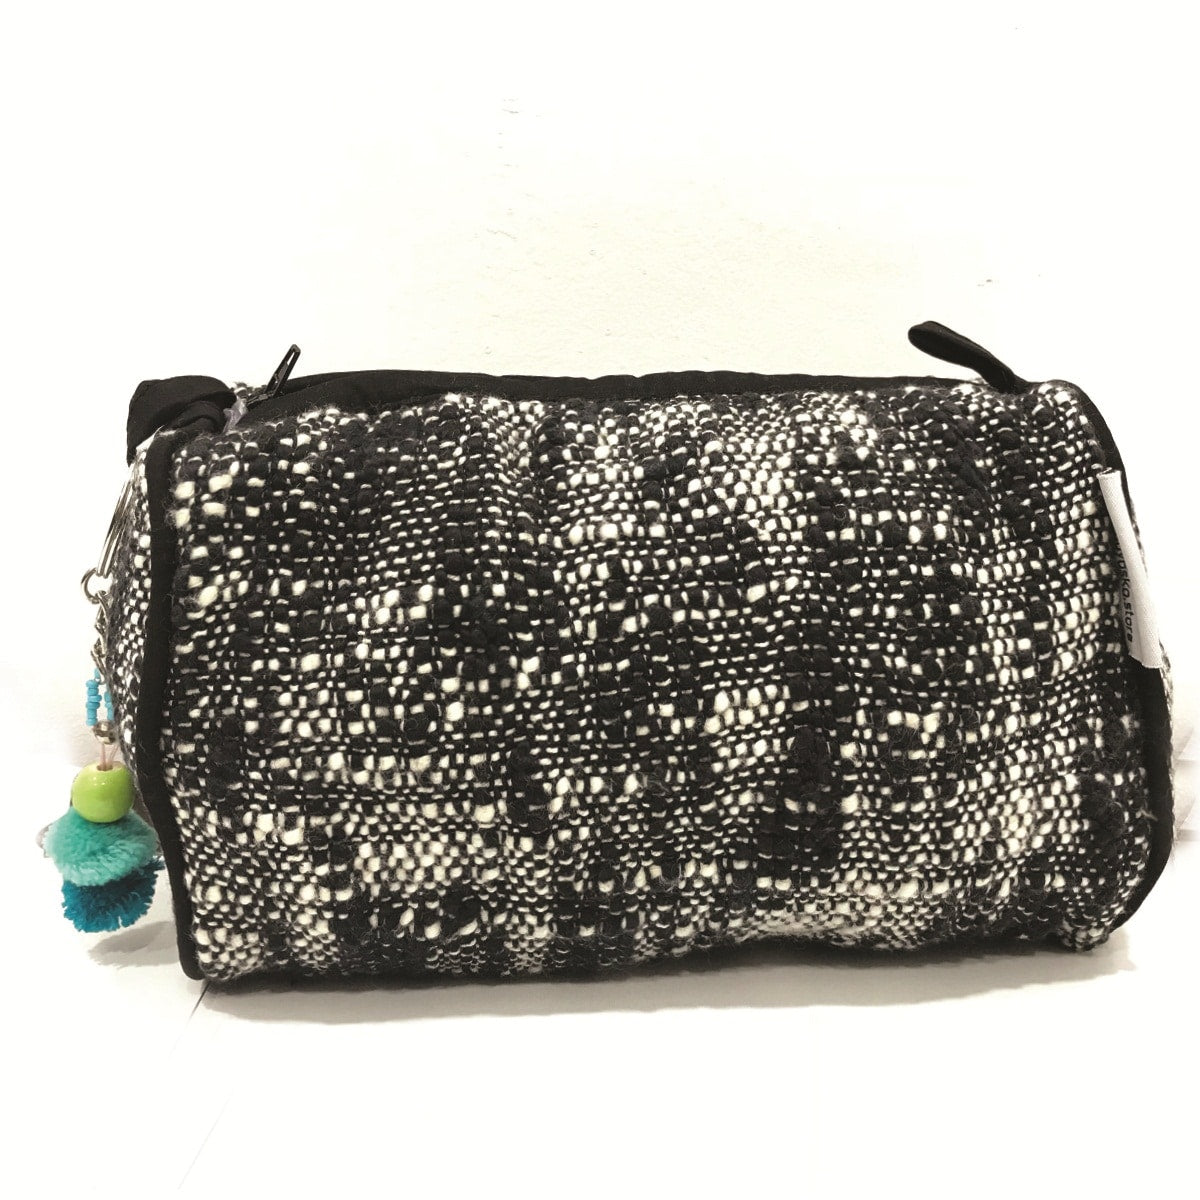 Cotton handwoven Make Up Case Handmade black and white Jewelry Pouch Travel Bag